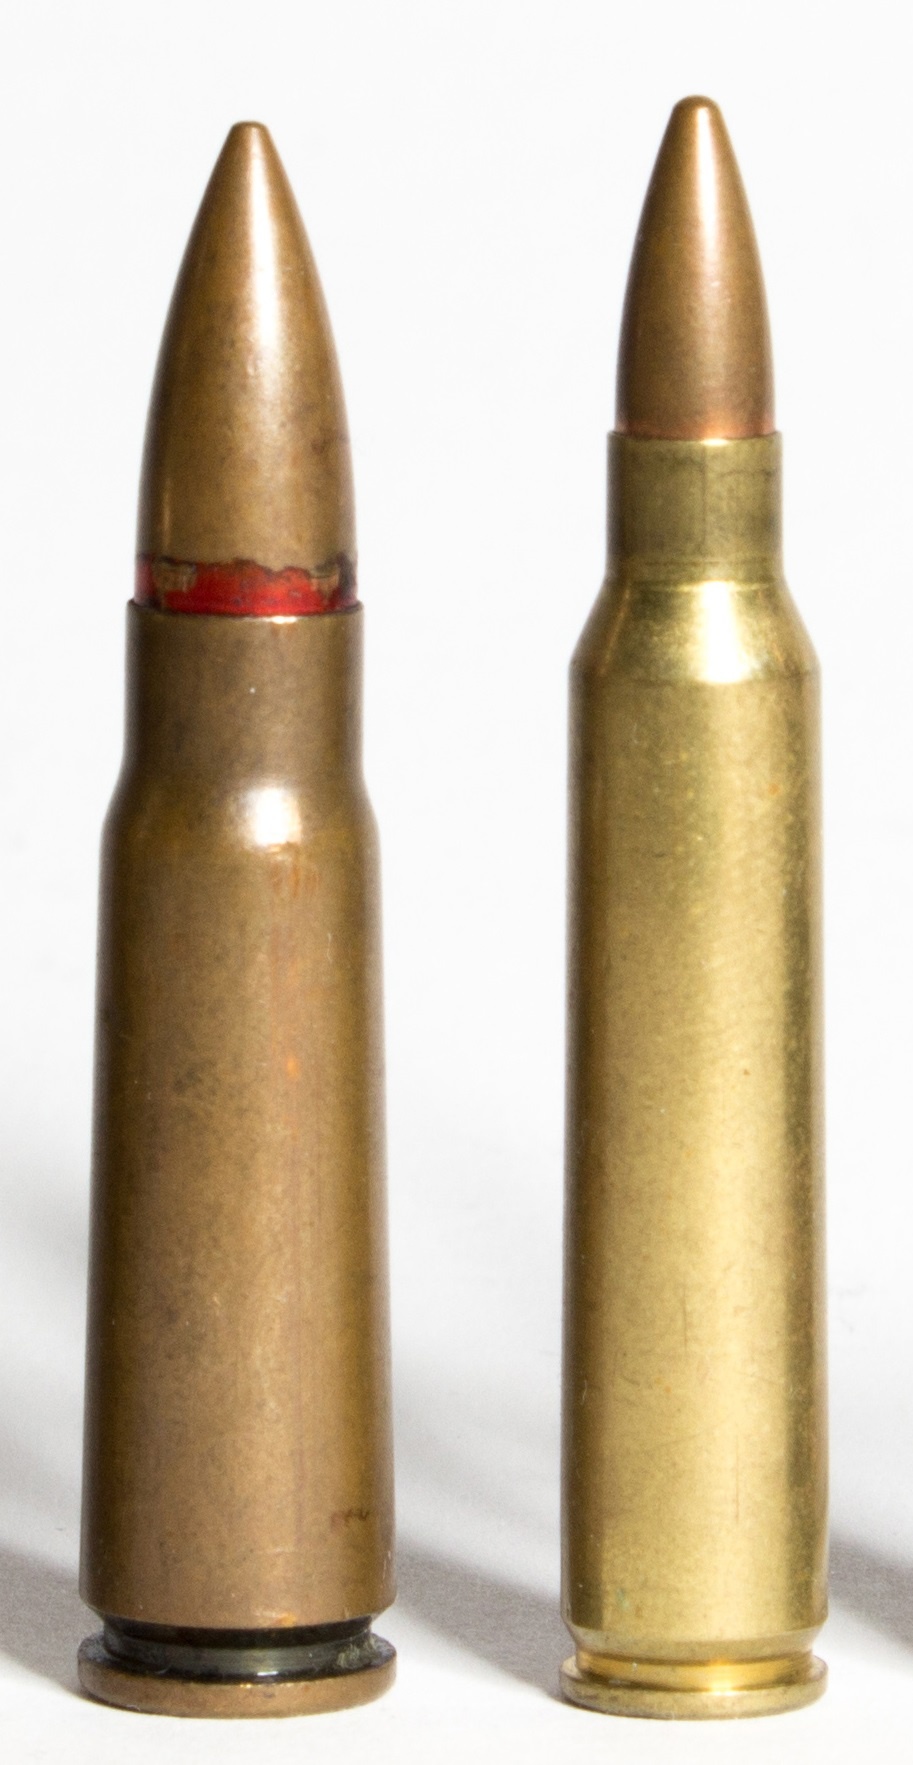 5.56 and 7.62